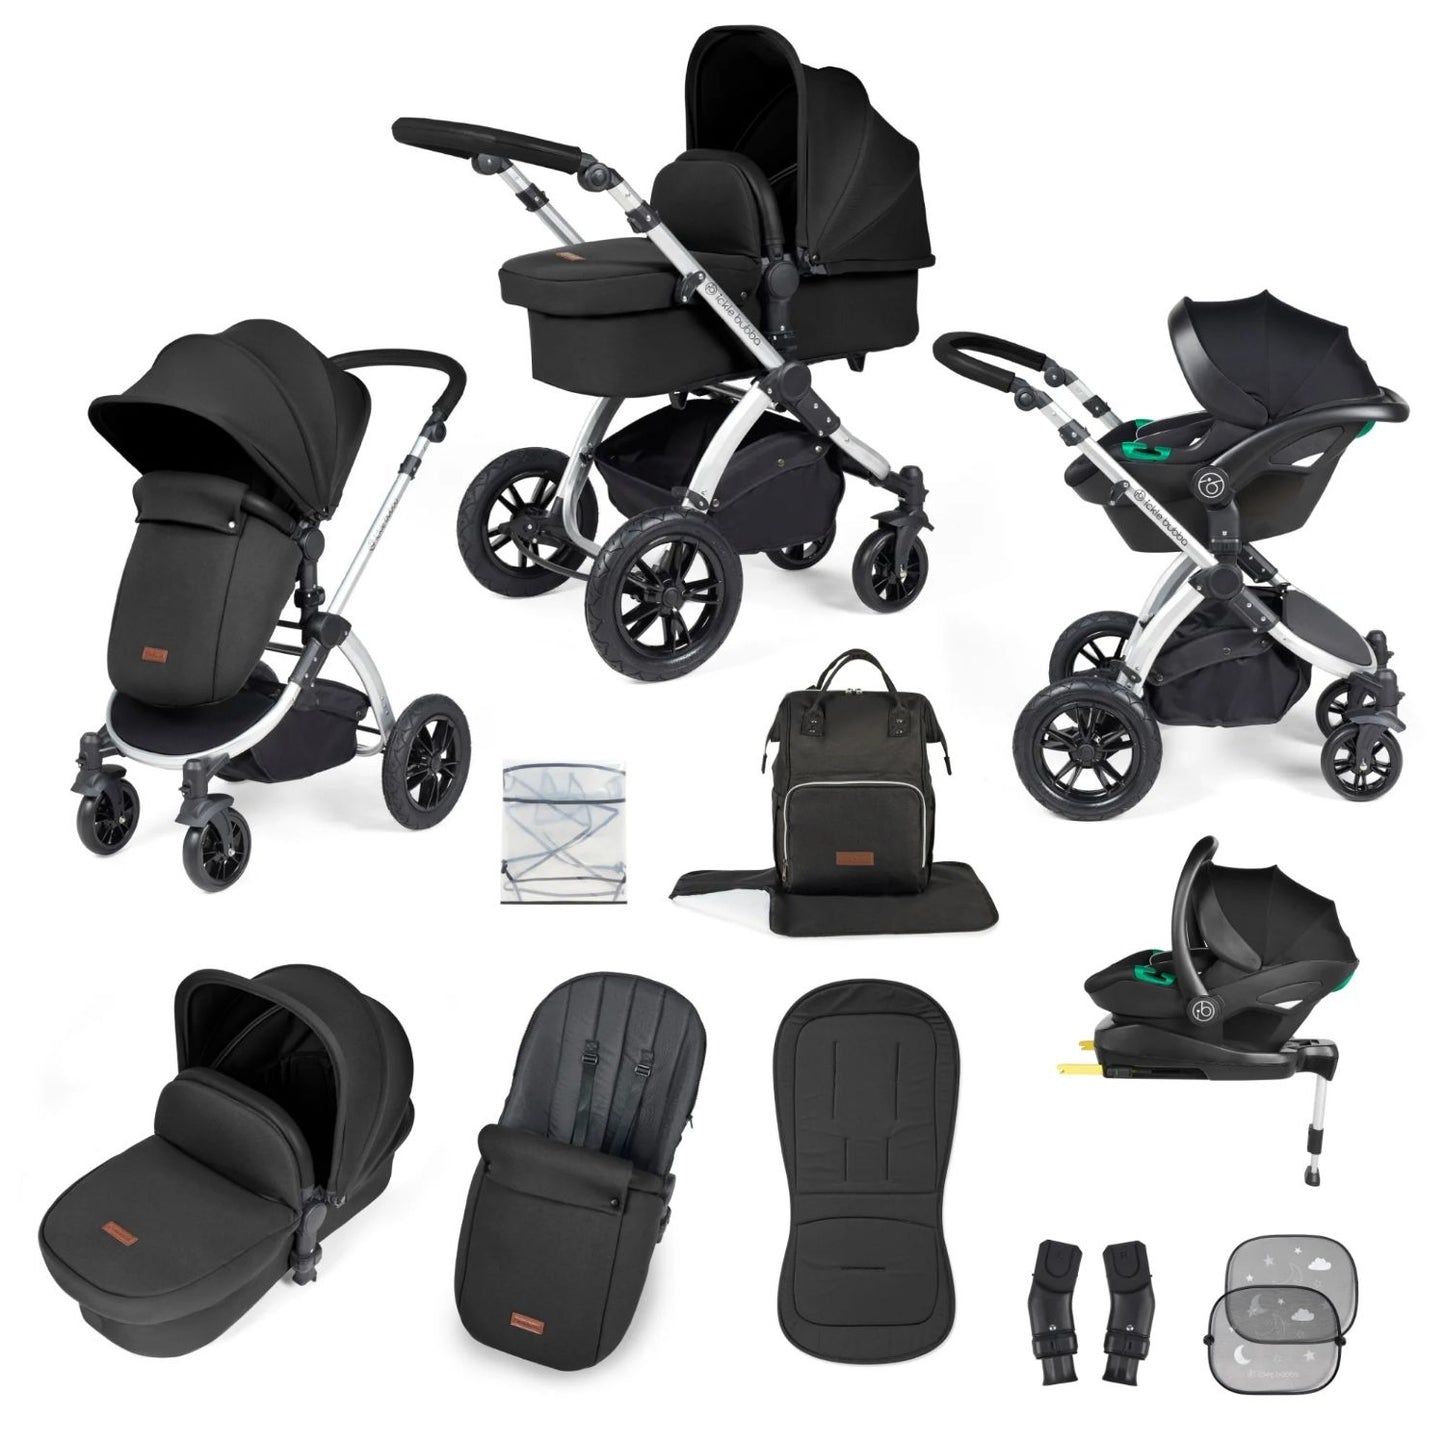 Ickle Bubba Stomp Luxe All-in-One Travel System with Stratus i-Size Car Seat and ISOFIX Base and accessories in Midnight black colour with silver chassis